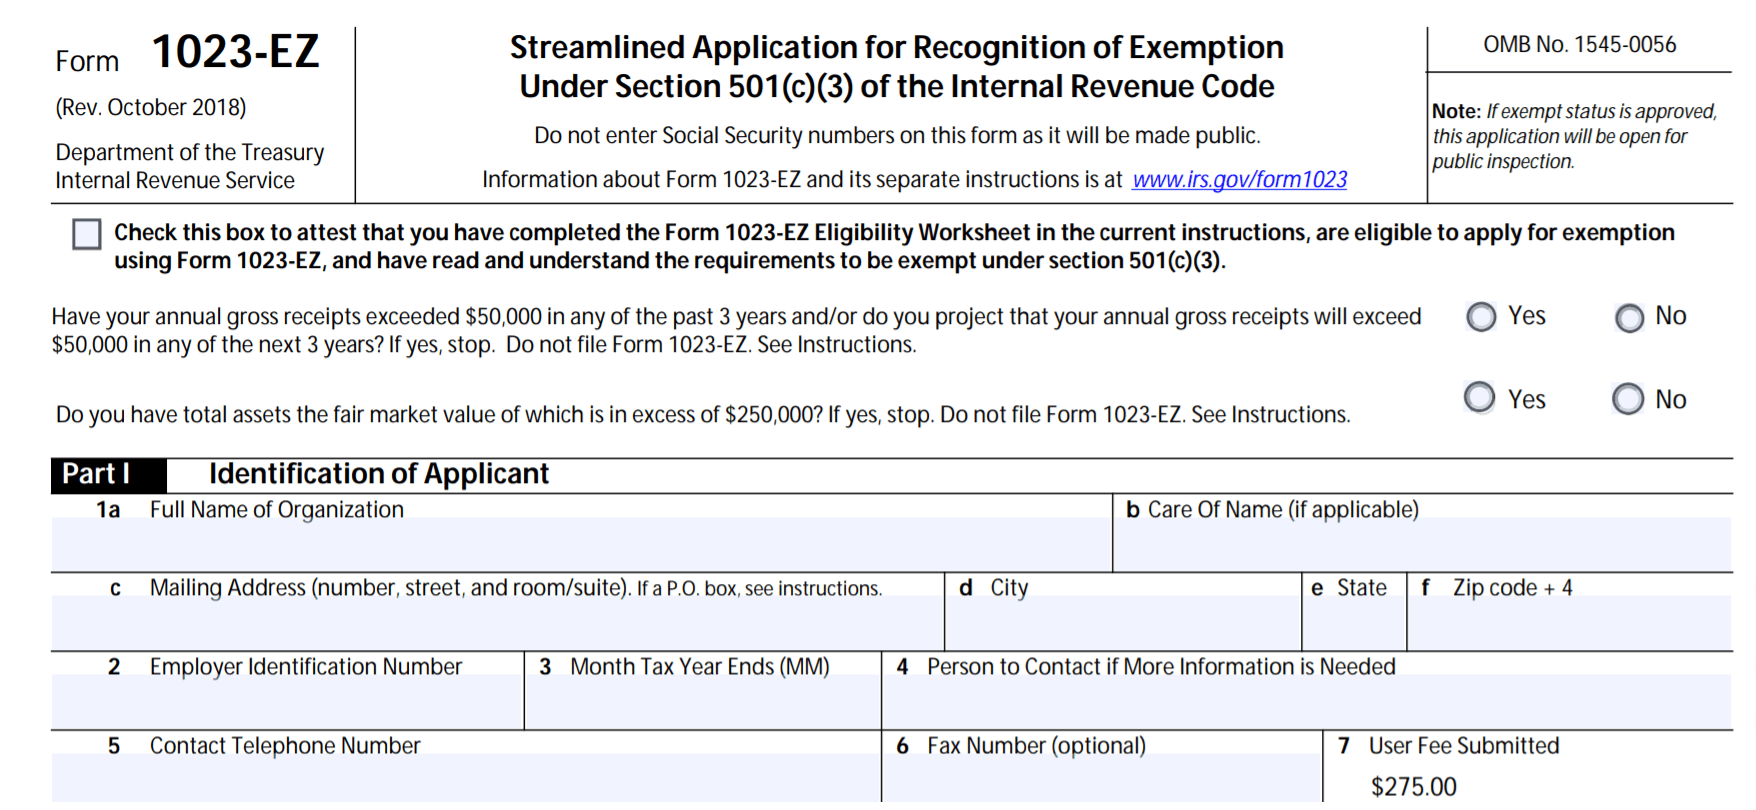 Form 1023-EZ Streamlined Application for Recognition of Exemption Under Section 501(c)(3)